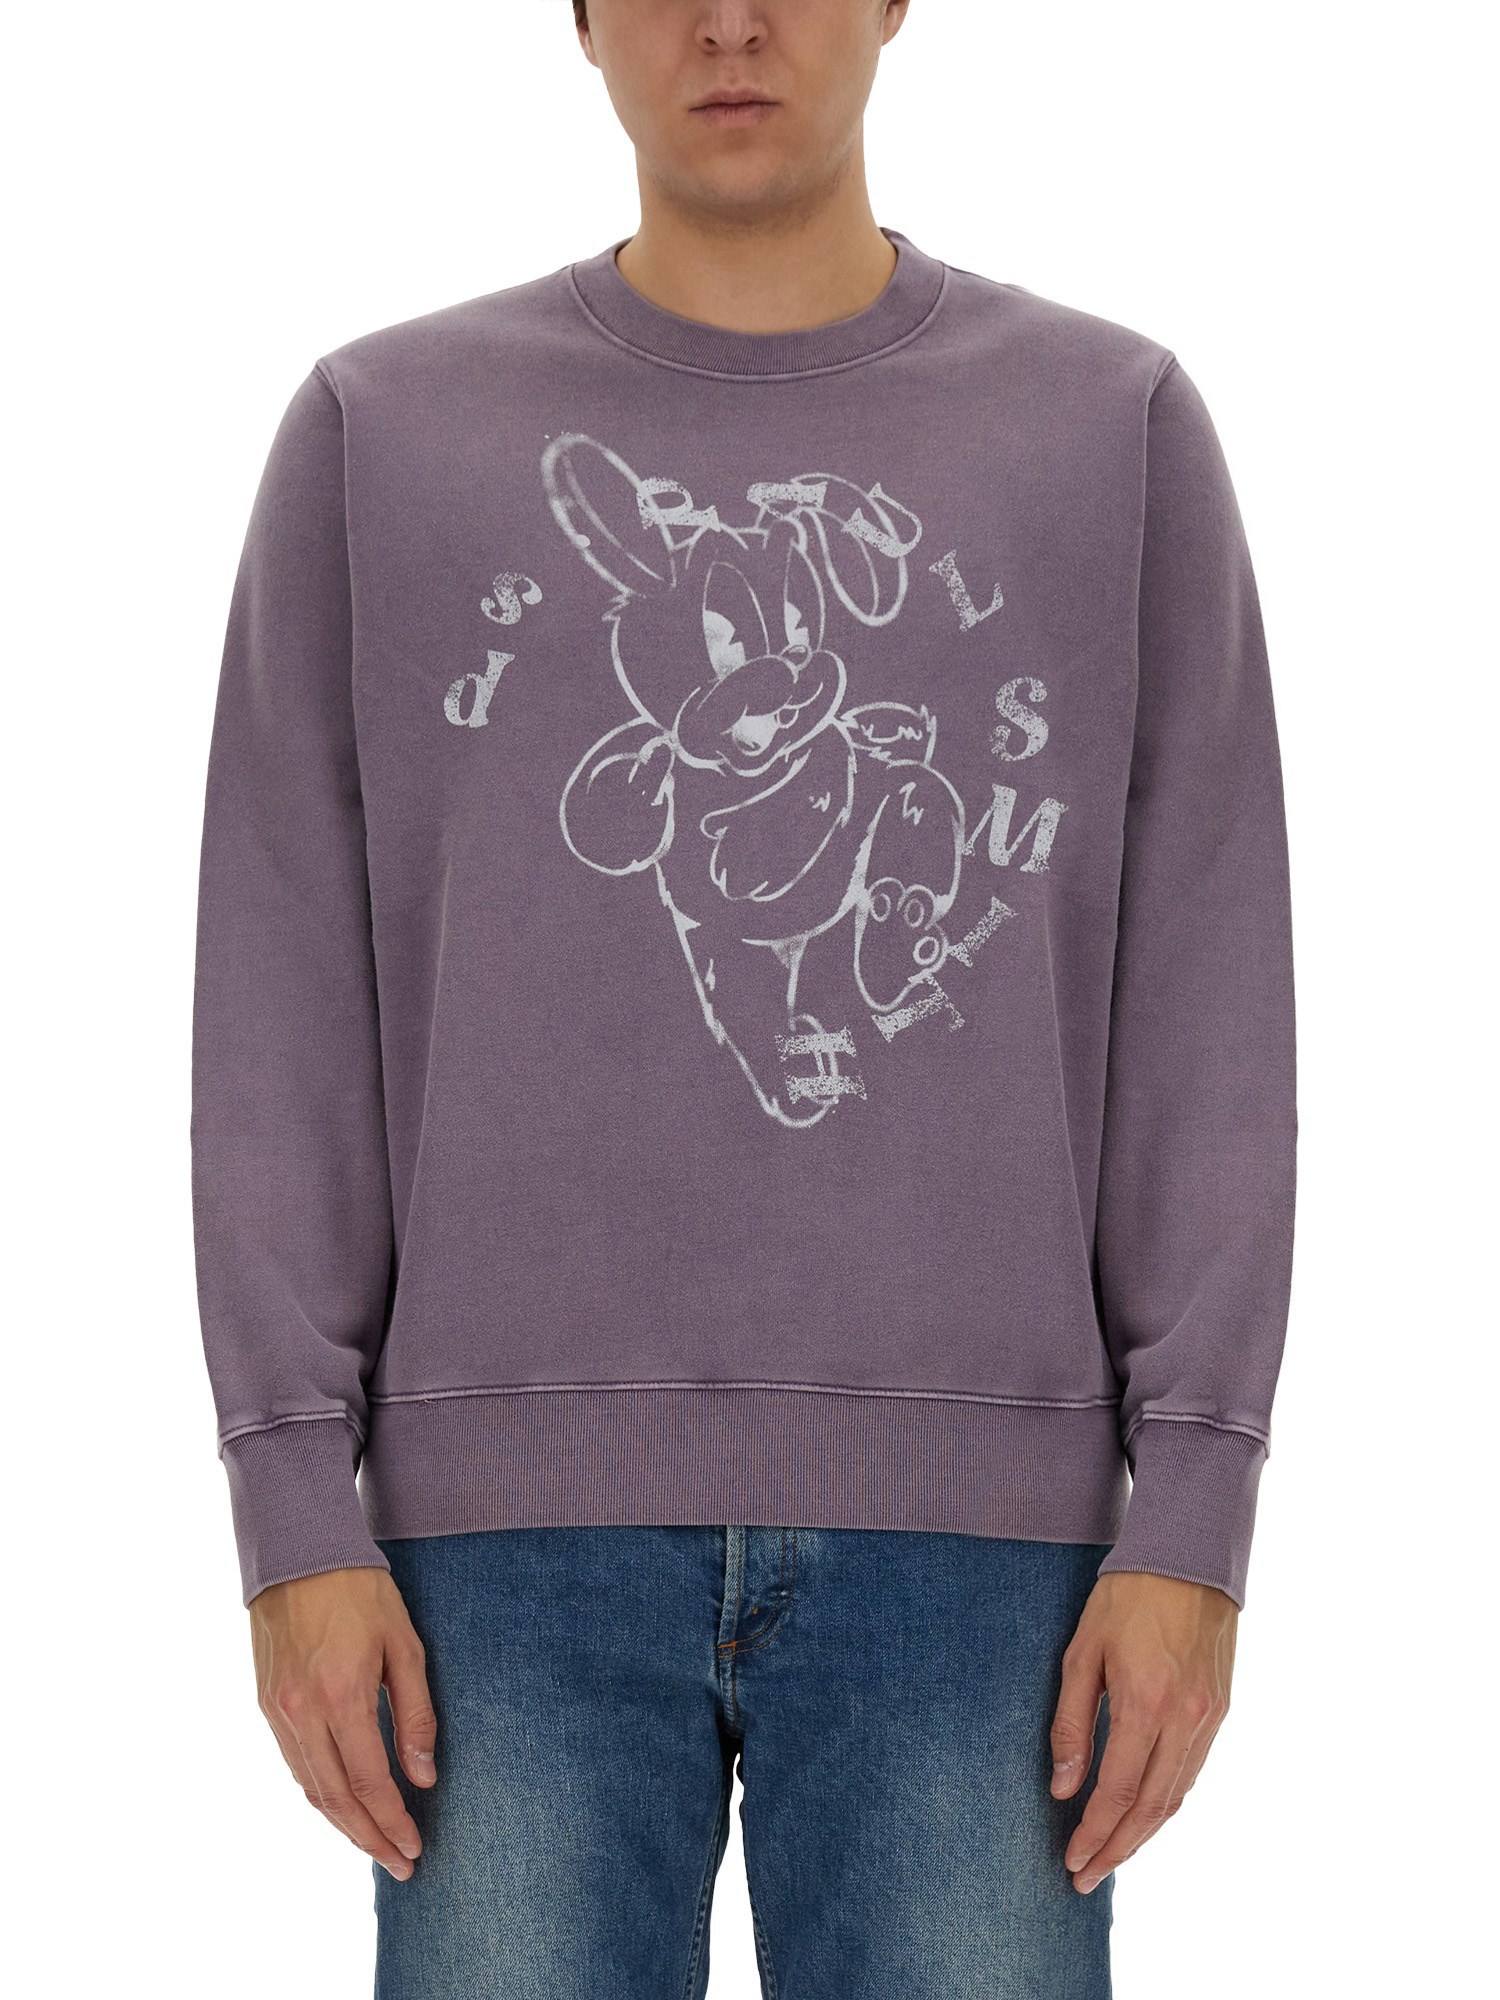 ps by paul smith sweatshirt with bunny print